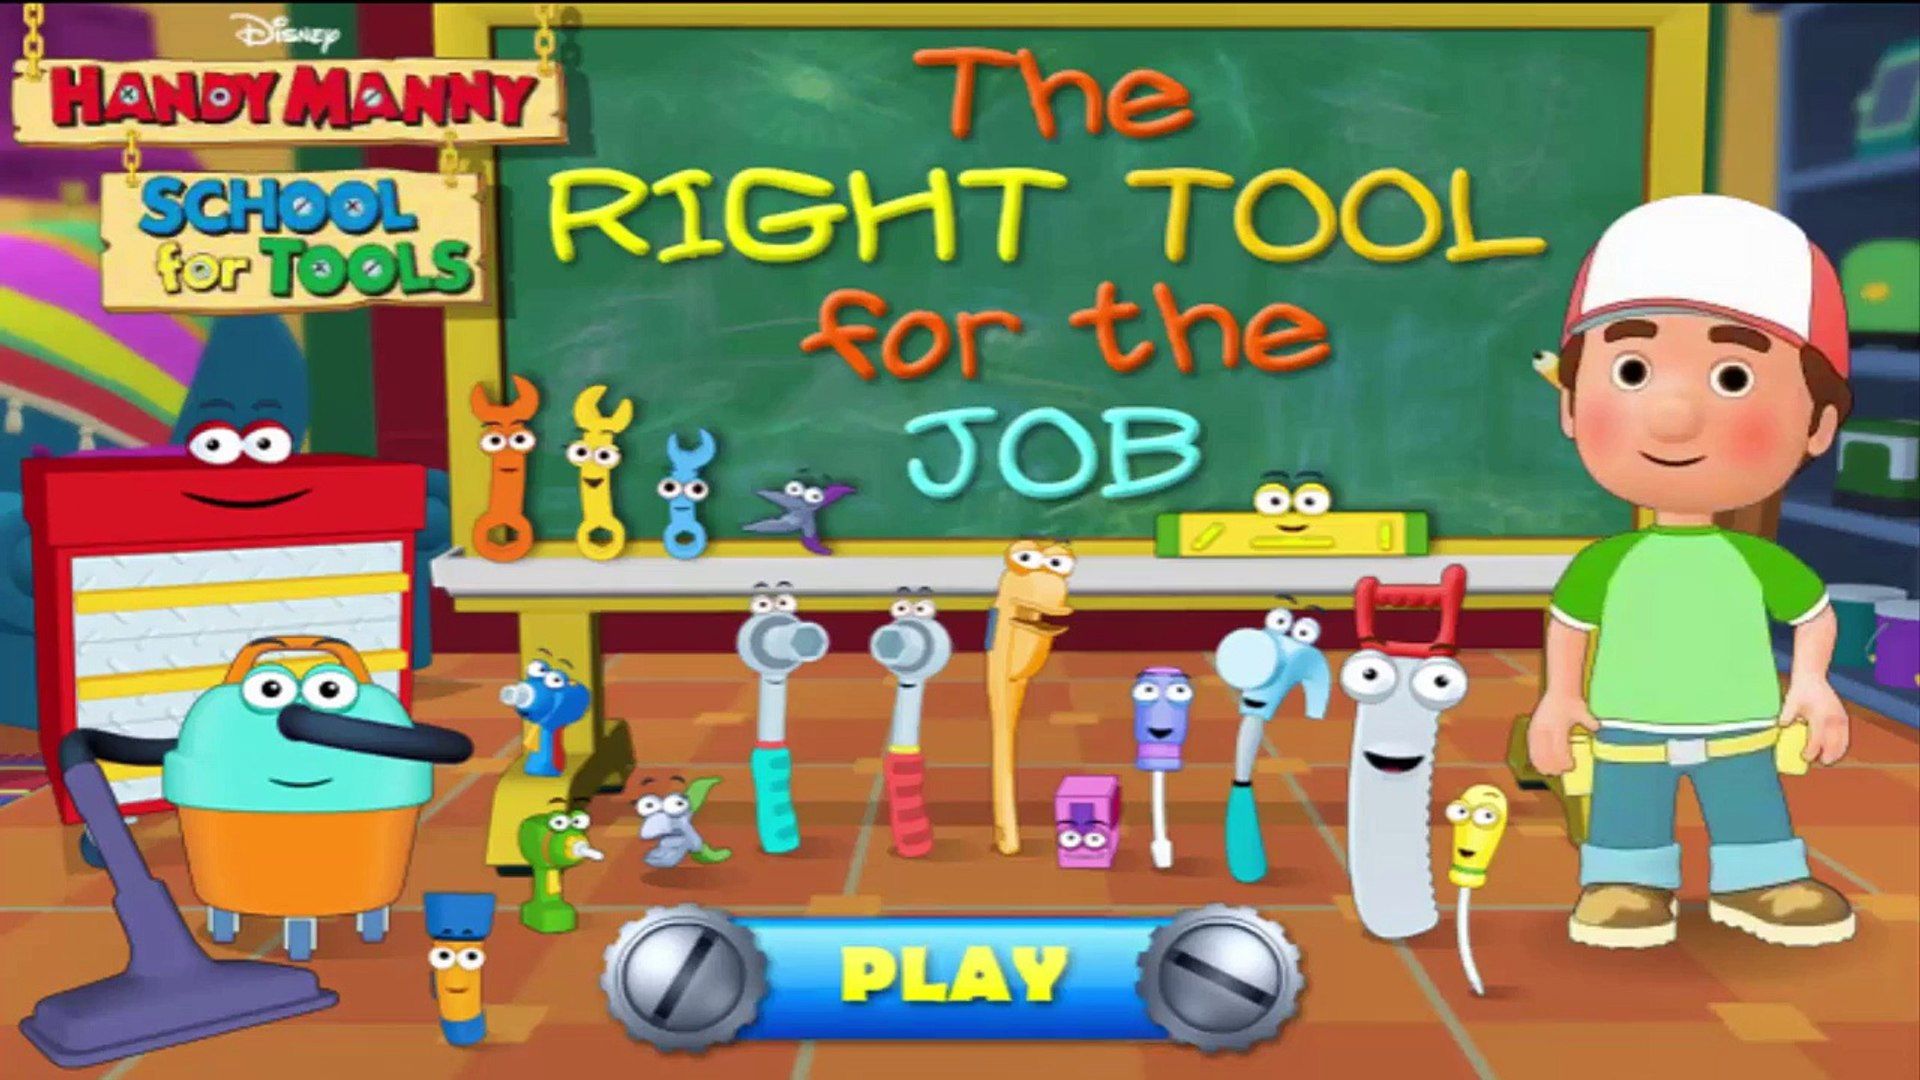 Handy Manny for Tools: The Right Tool for the Job